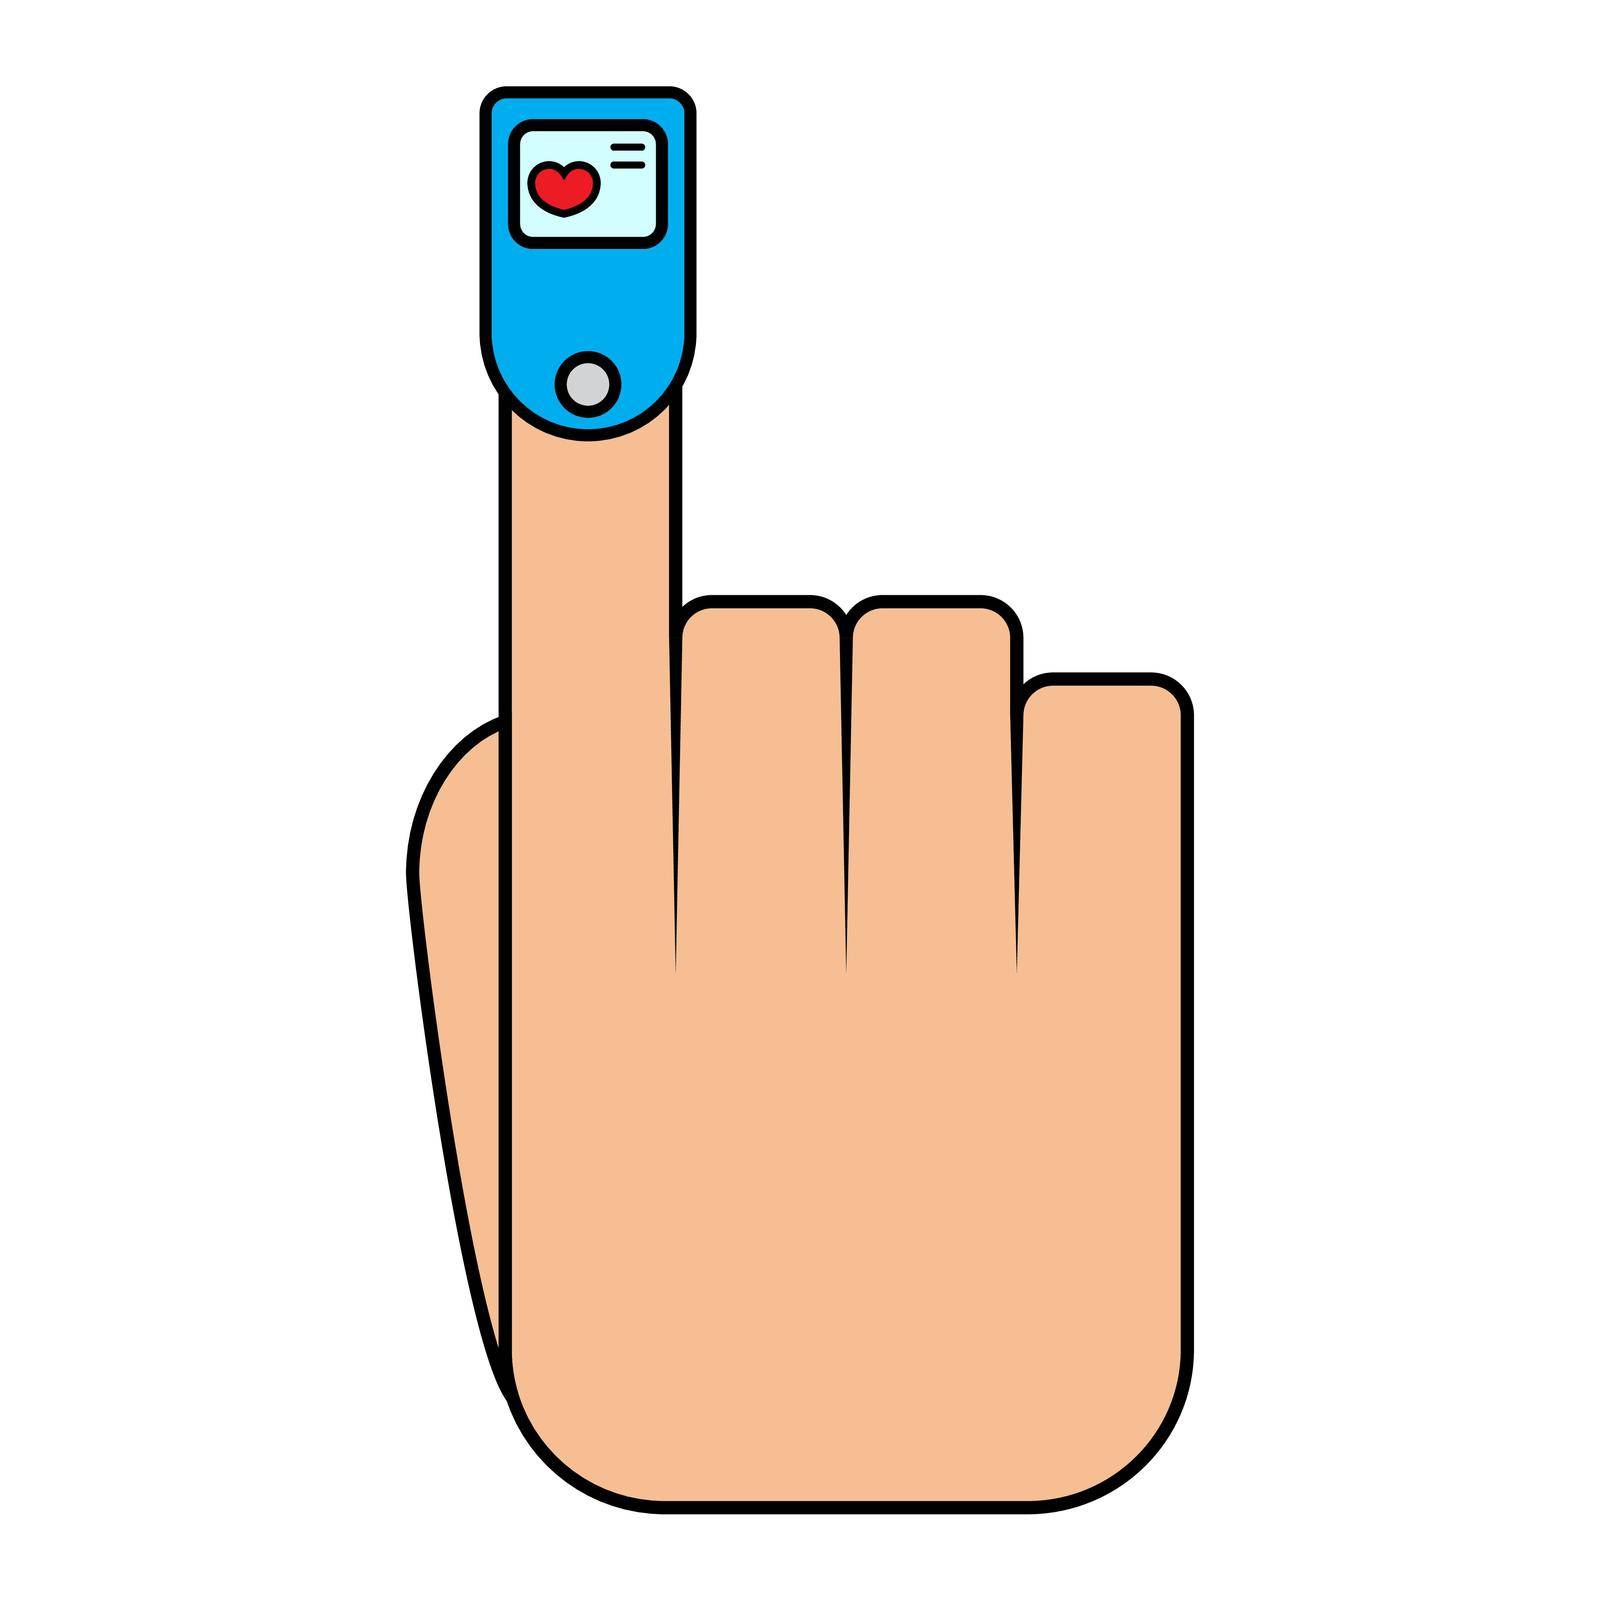 Oximeter on finger. Measurement of pulse and saturation of blood with oxygen. Medical equipment, cardio test. Healthcare concept. Monitoring health. Flat cartoon vector illustration by wektorygrafika